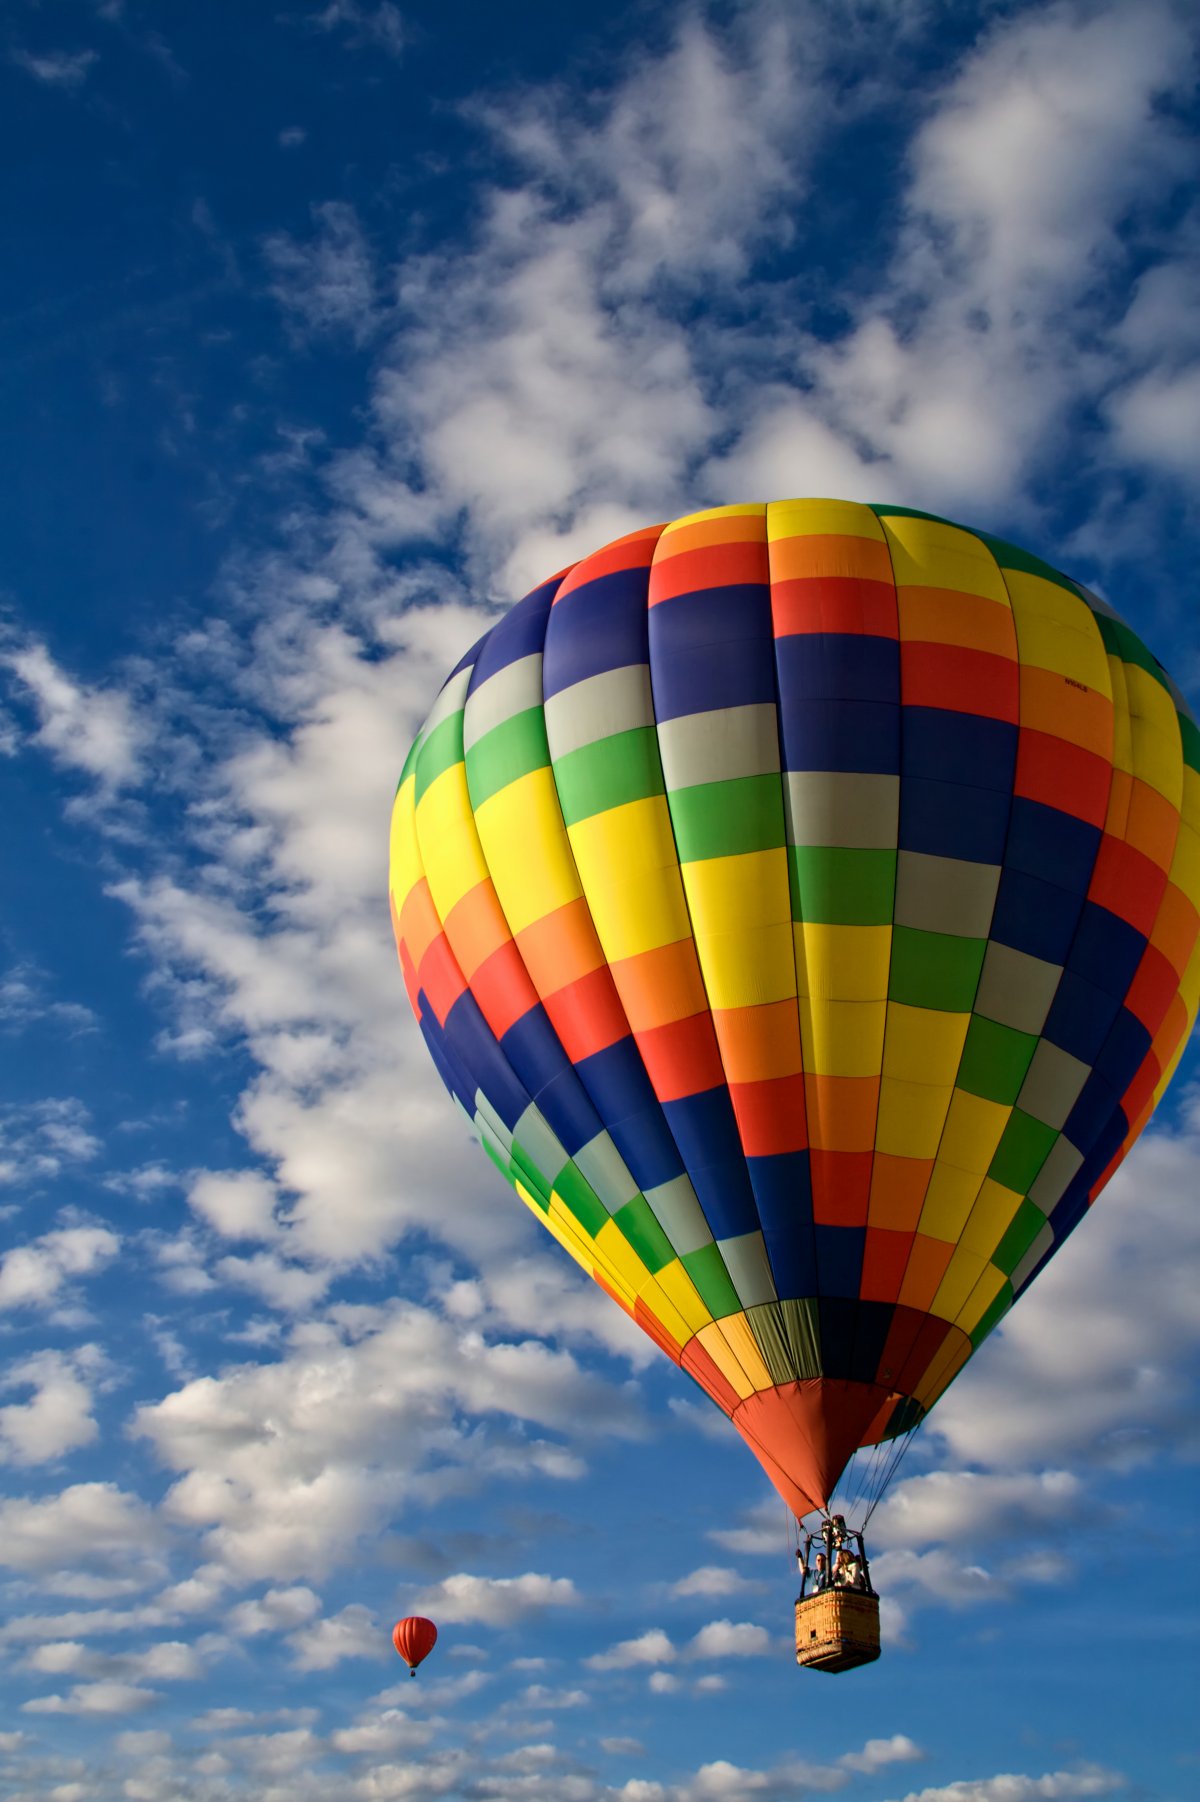 HD pictures of hot air balloons in the sky